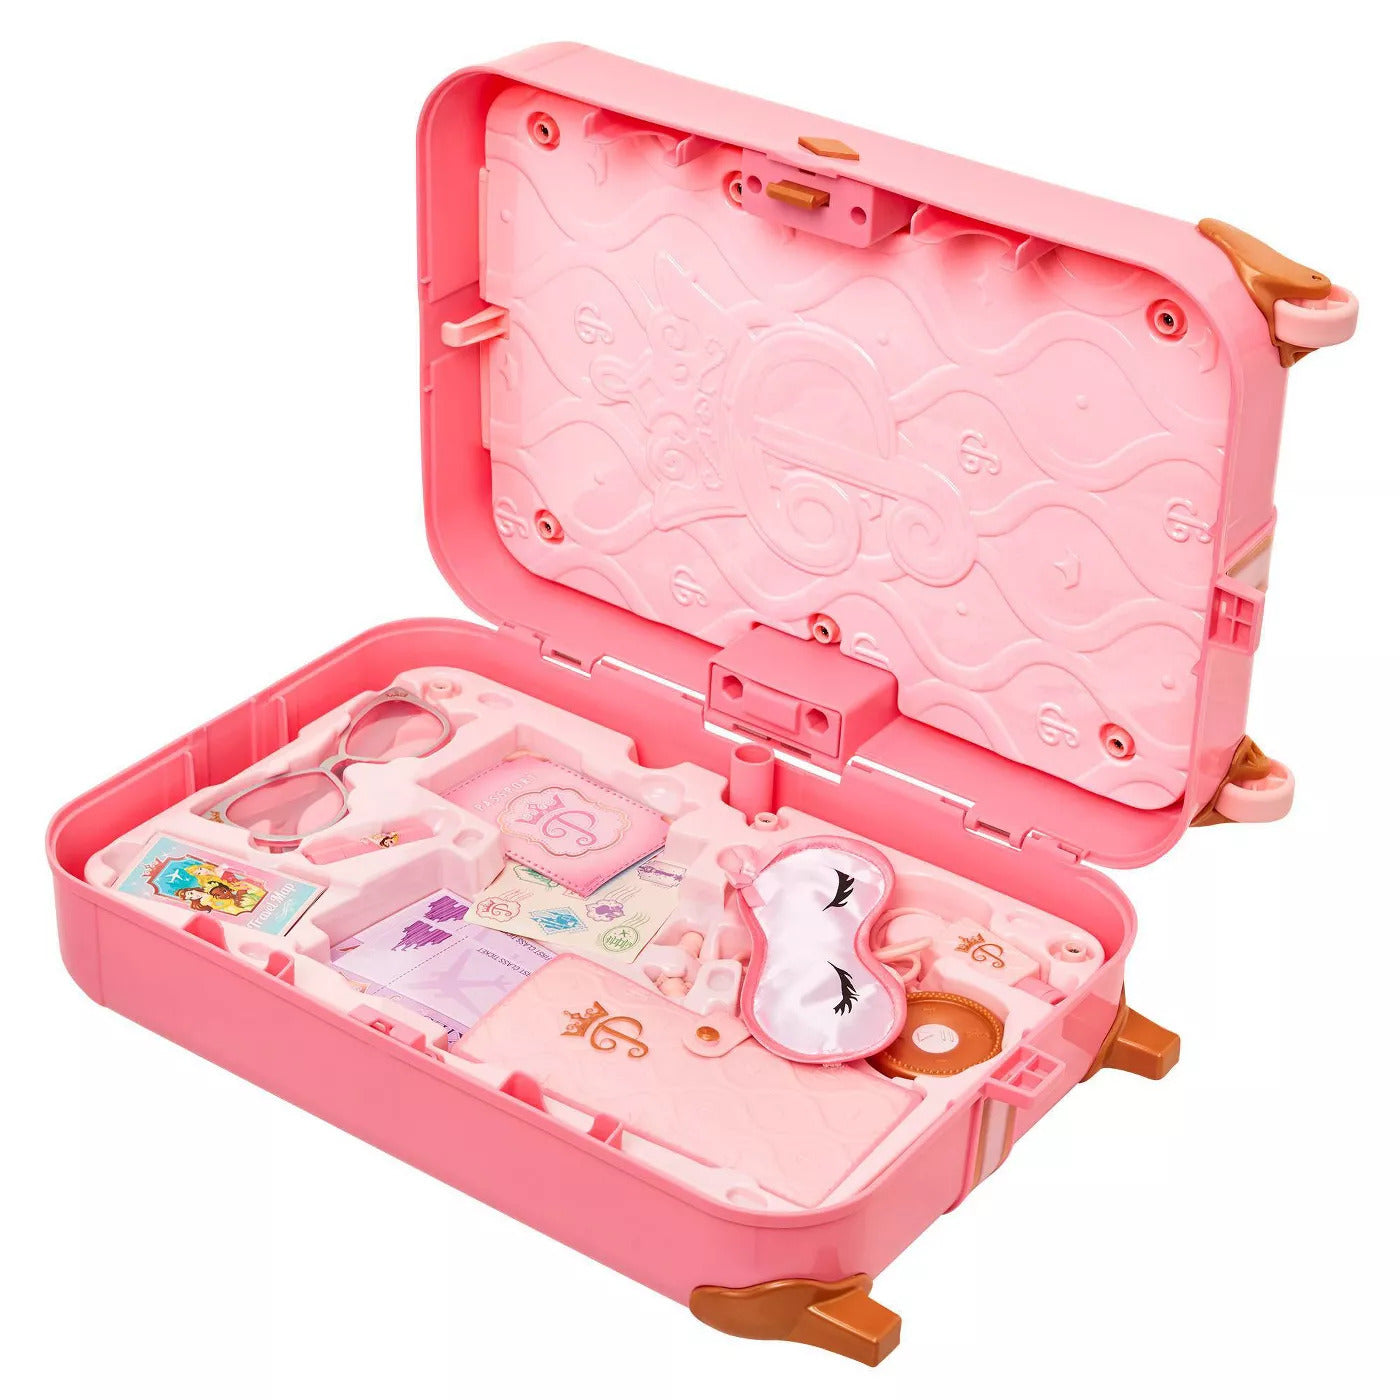 Disney Princess Style Collection - Play Suitcase